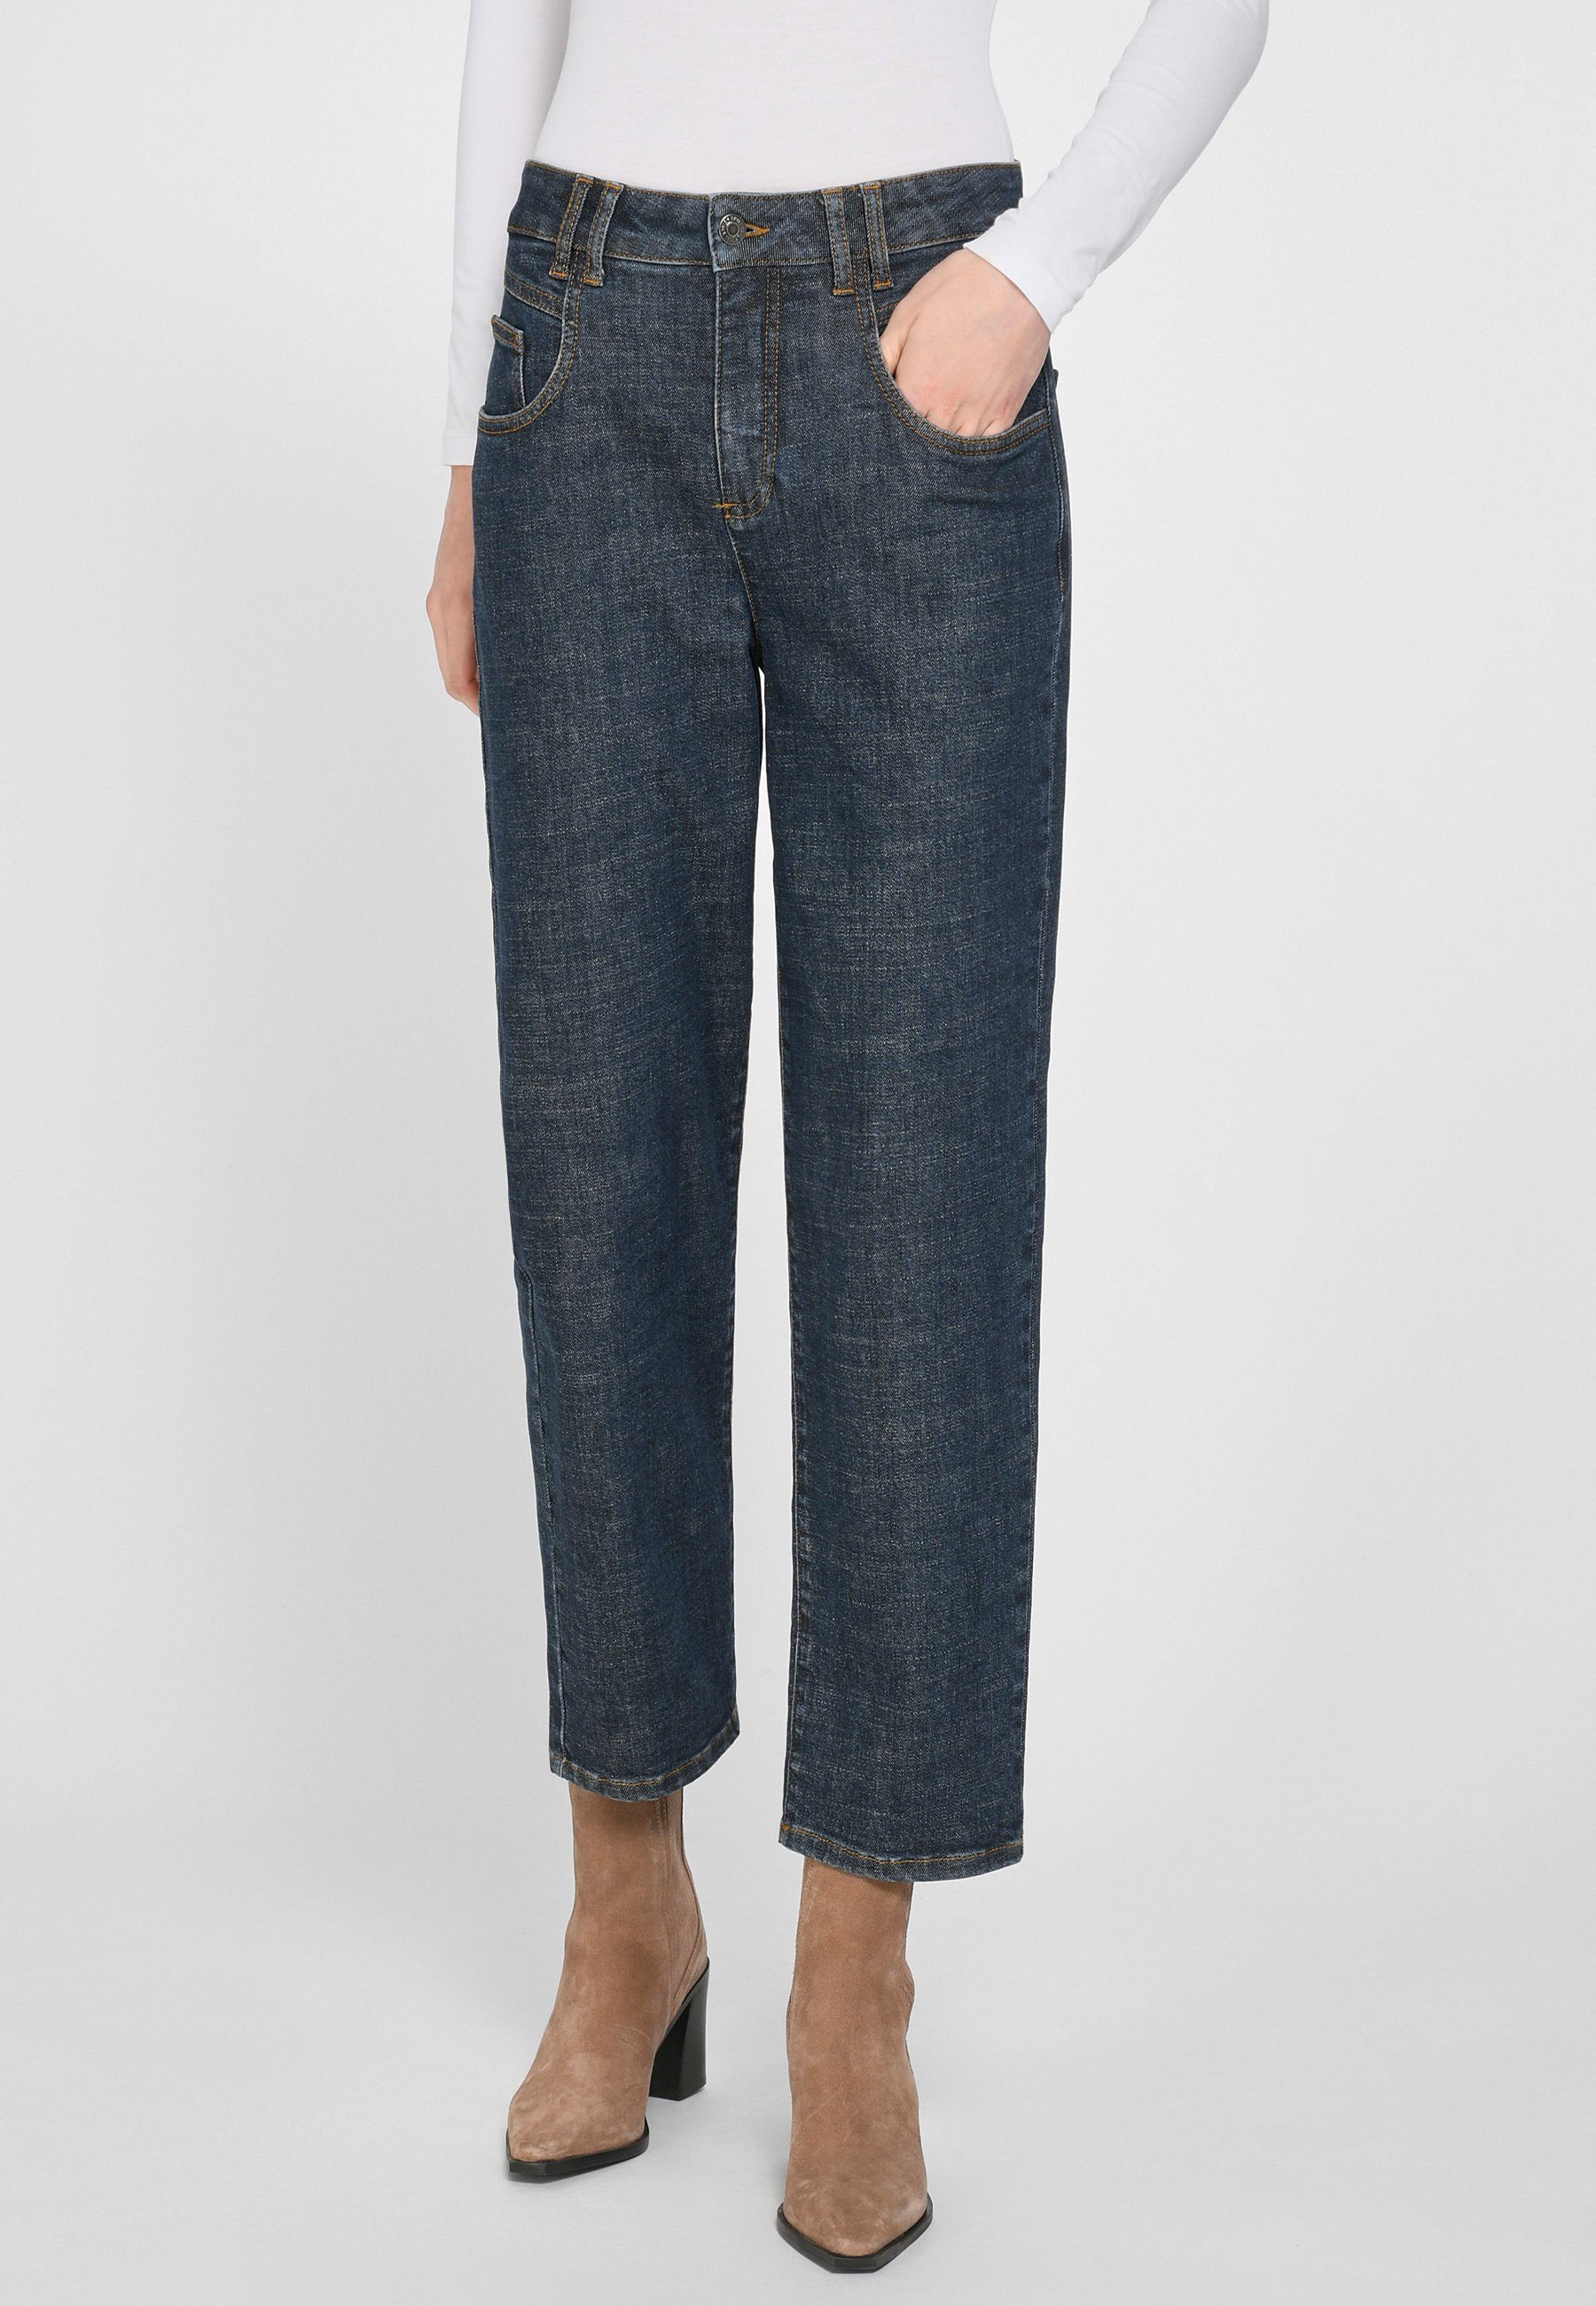 DAY.LIKE 7/8-Jeans Cotton